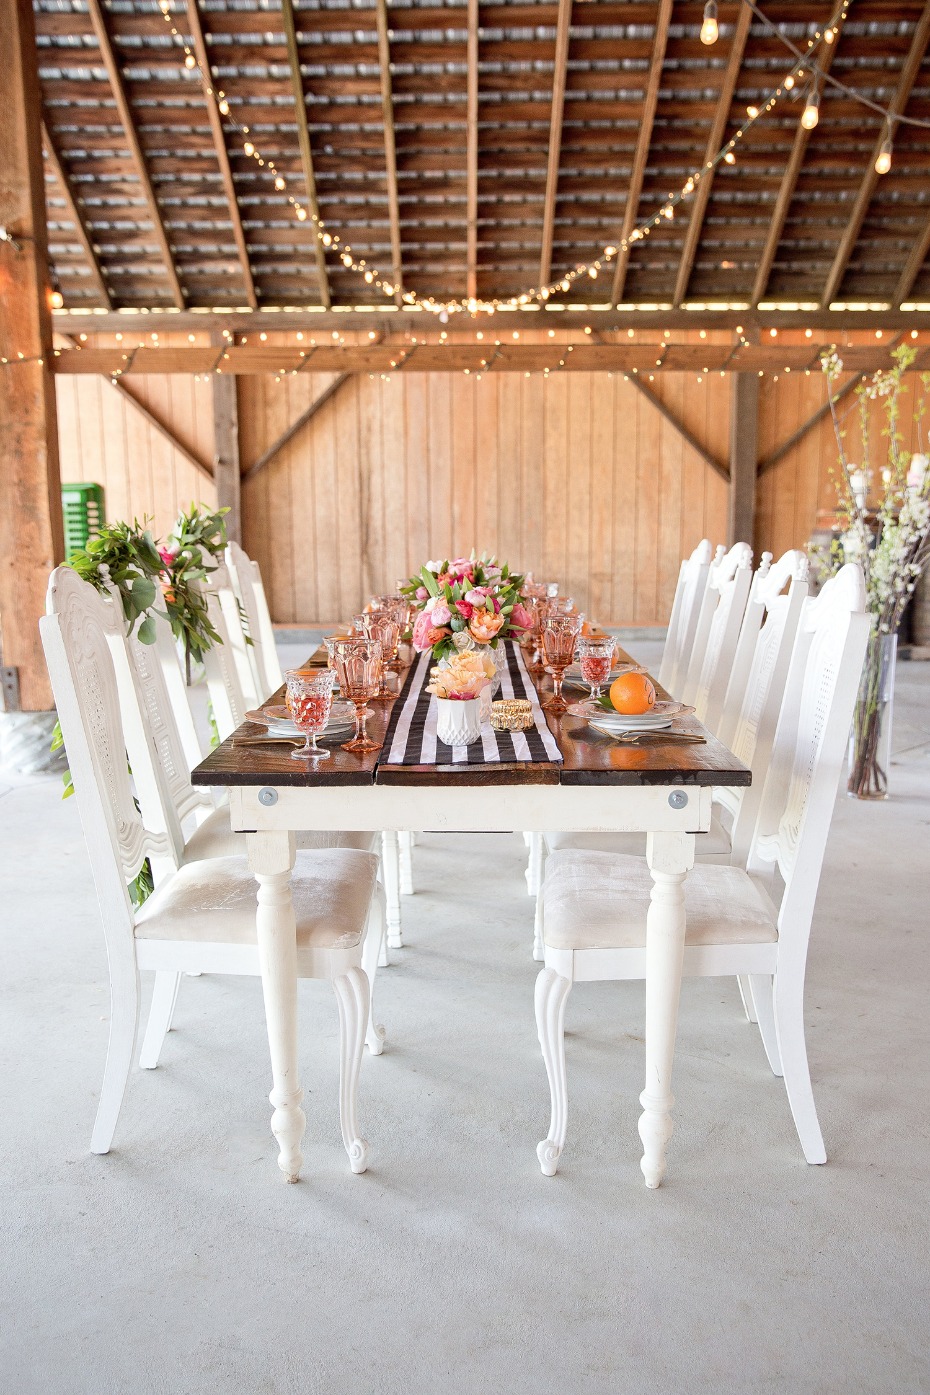 Kate Spade inspired reception table